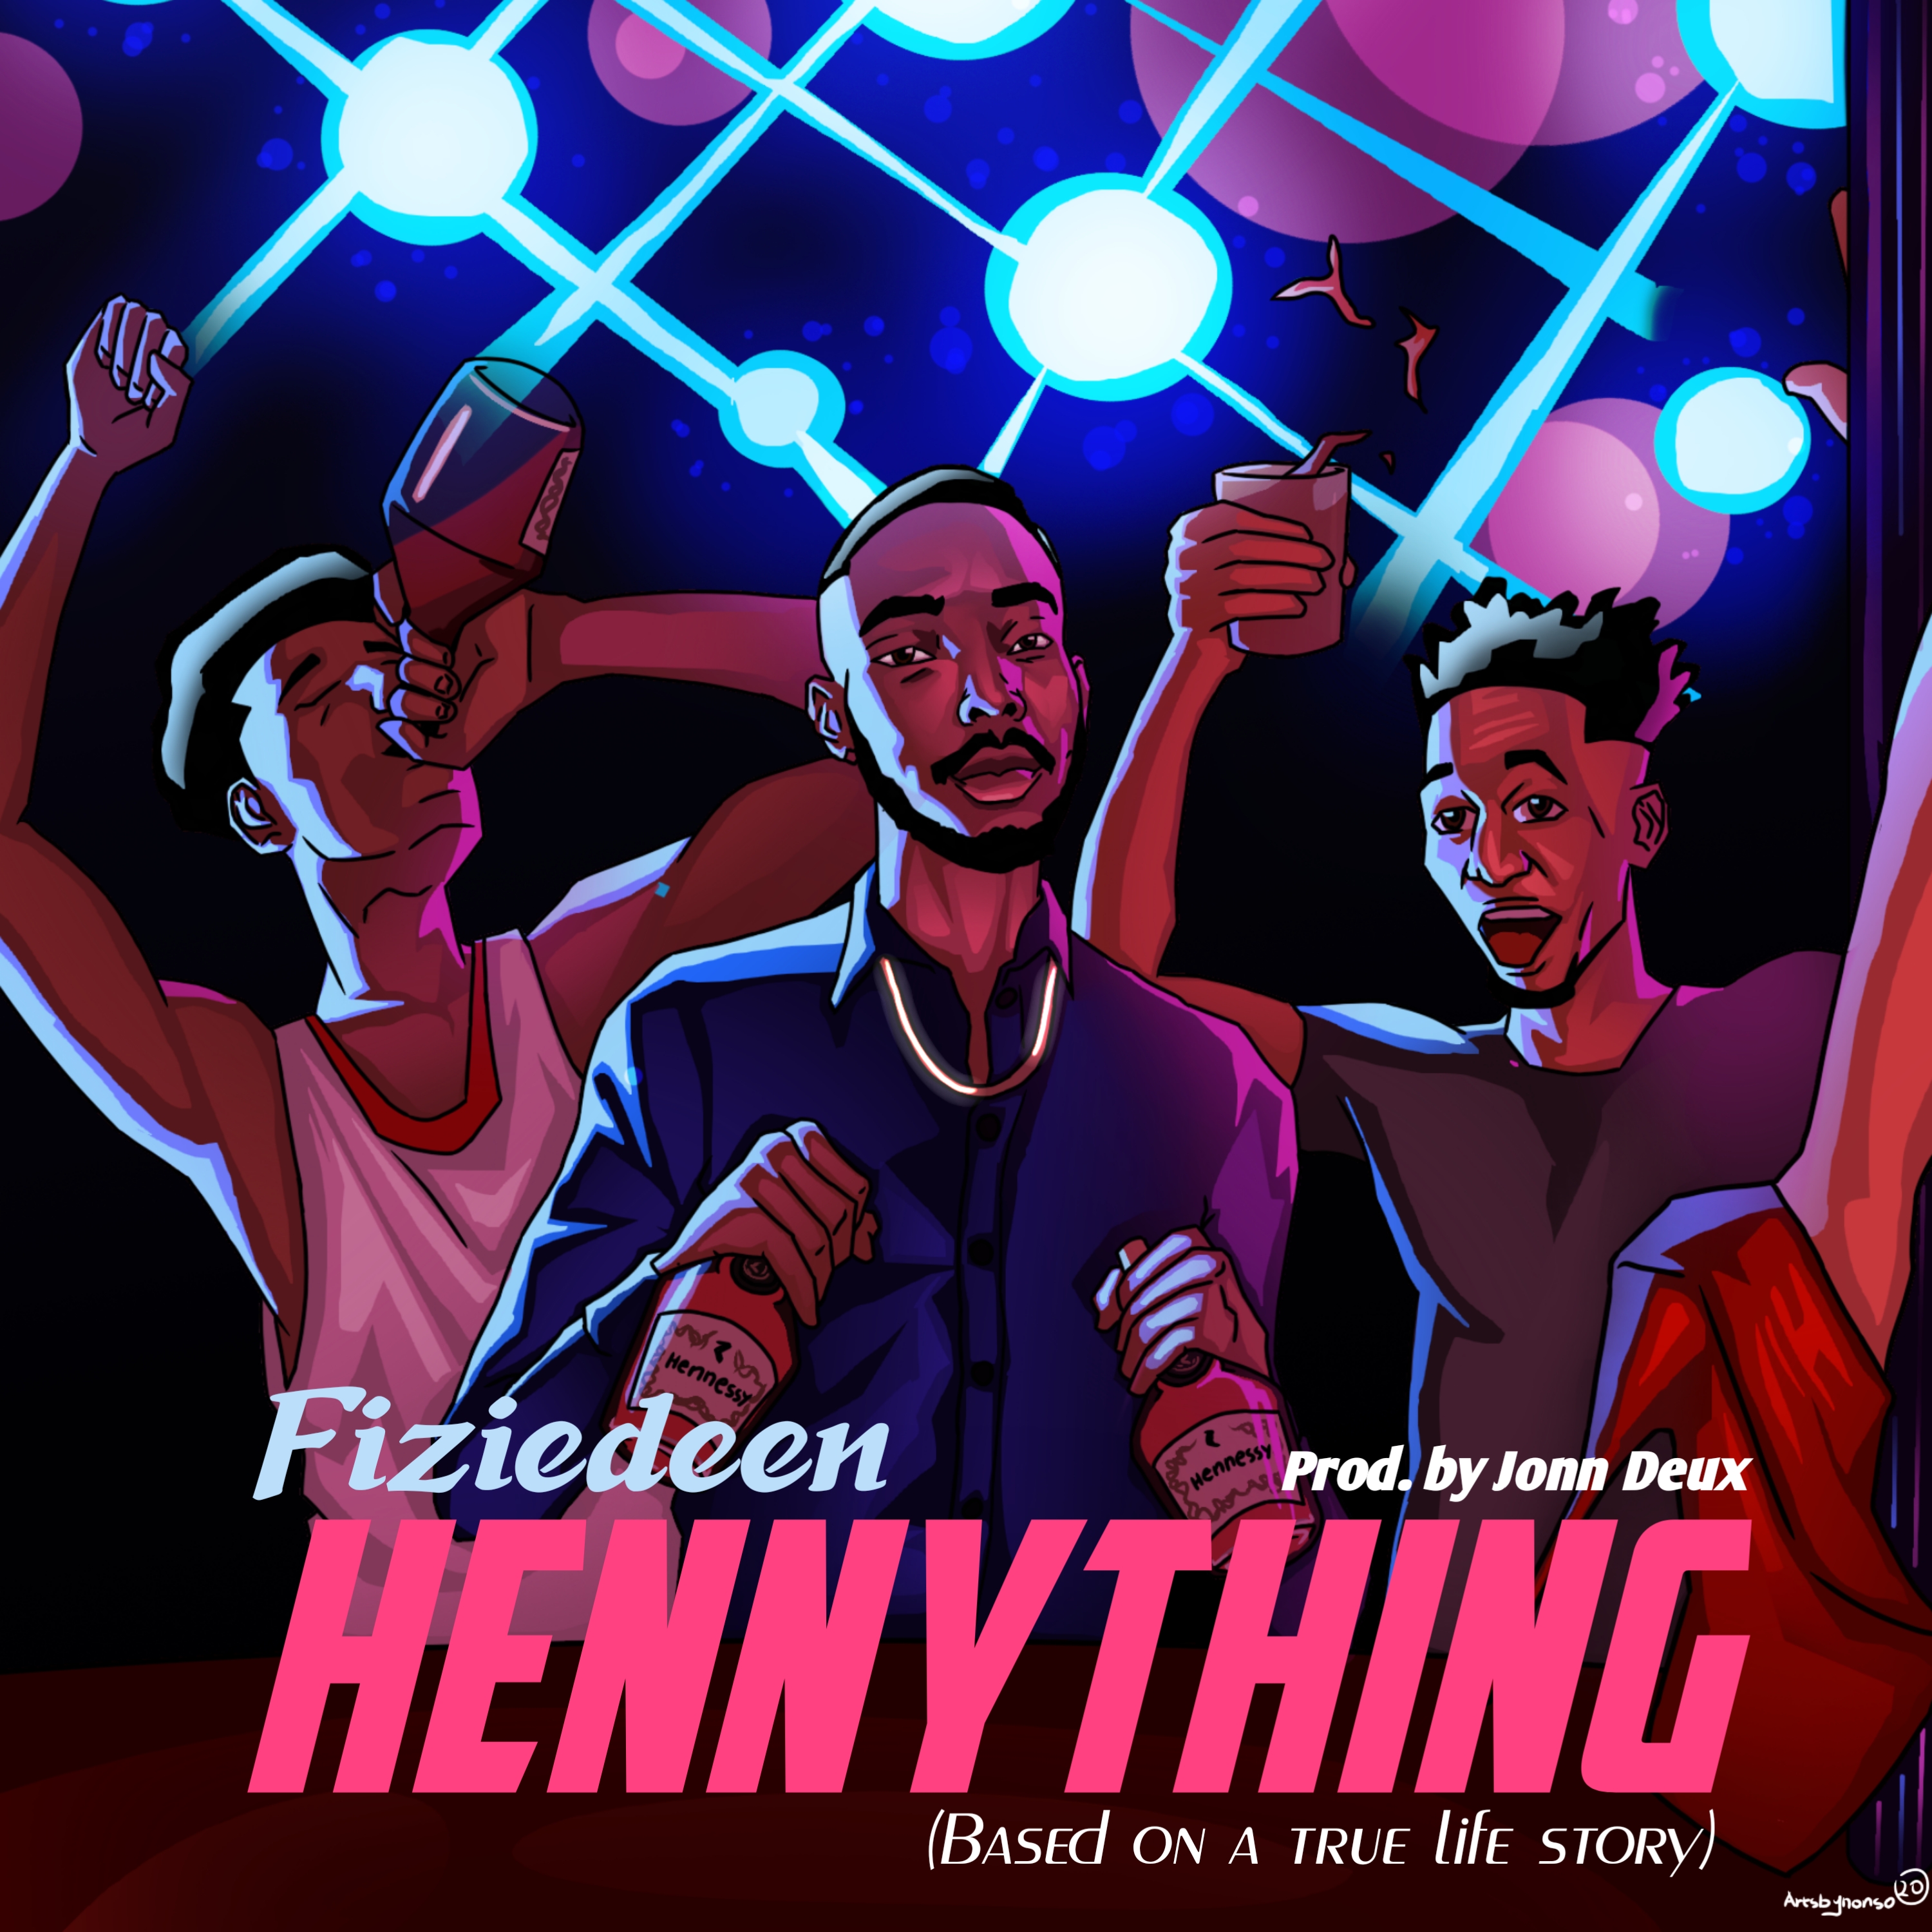 New Music: Hennything By Fiziedeen